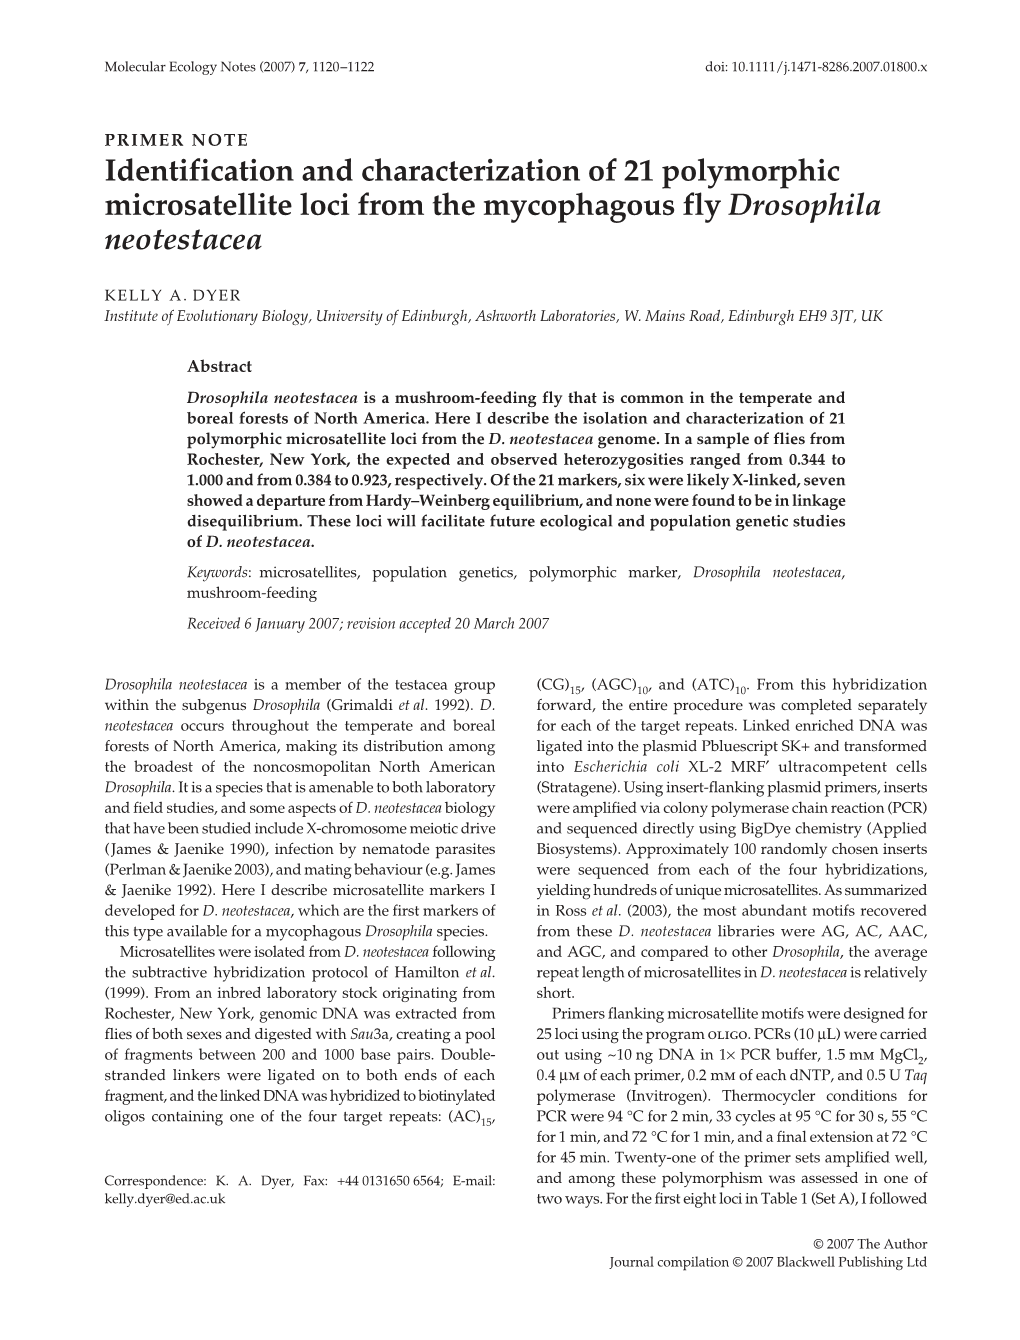 Identification and Characterization of 21 Polymorphic Microsatellite Loci from the Mycophagous Fly Drosophila Neotestacea